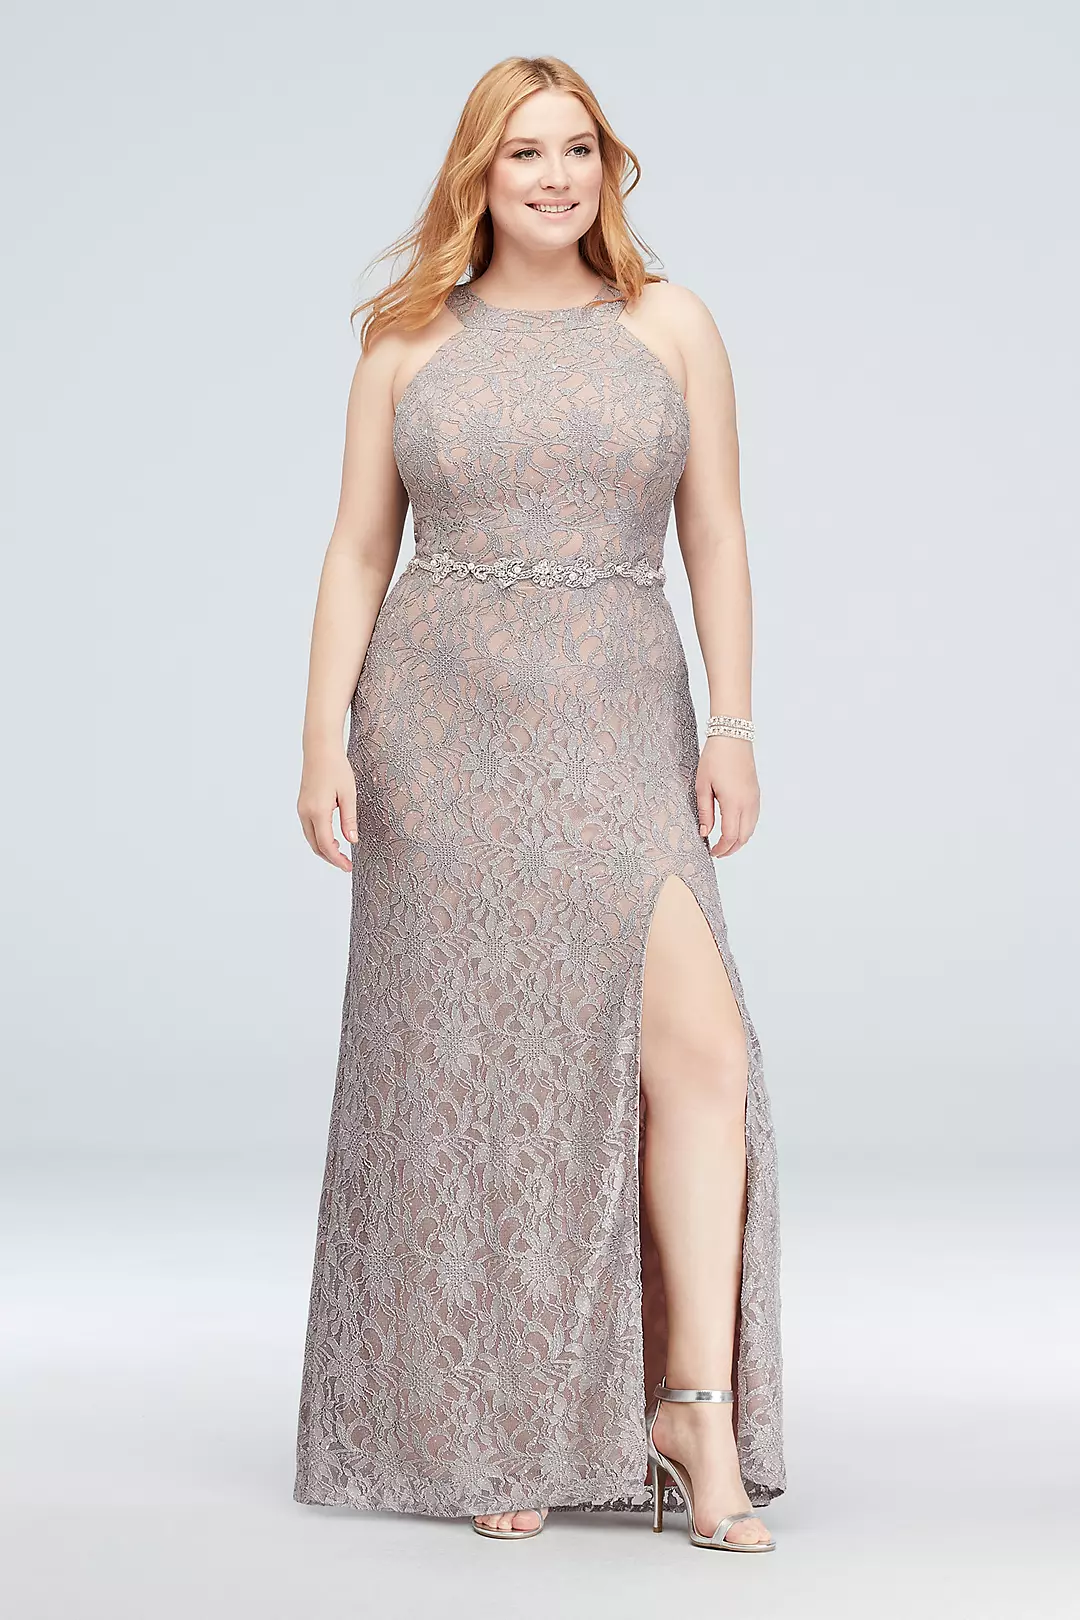 Glitter Lace Halter Sheath Gown with Beaded Belt Image